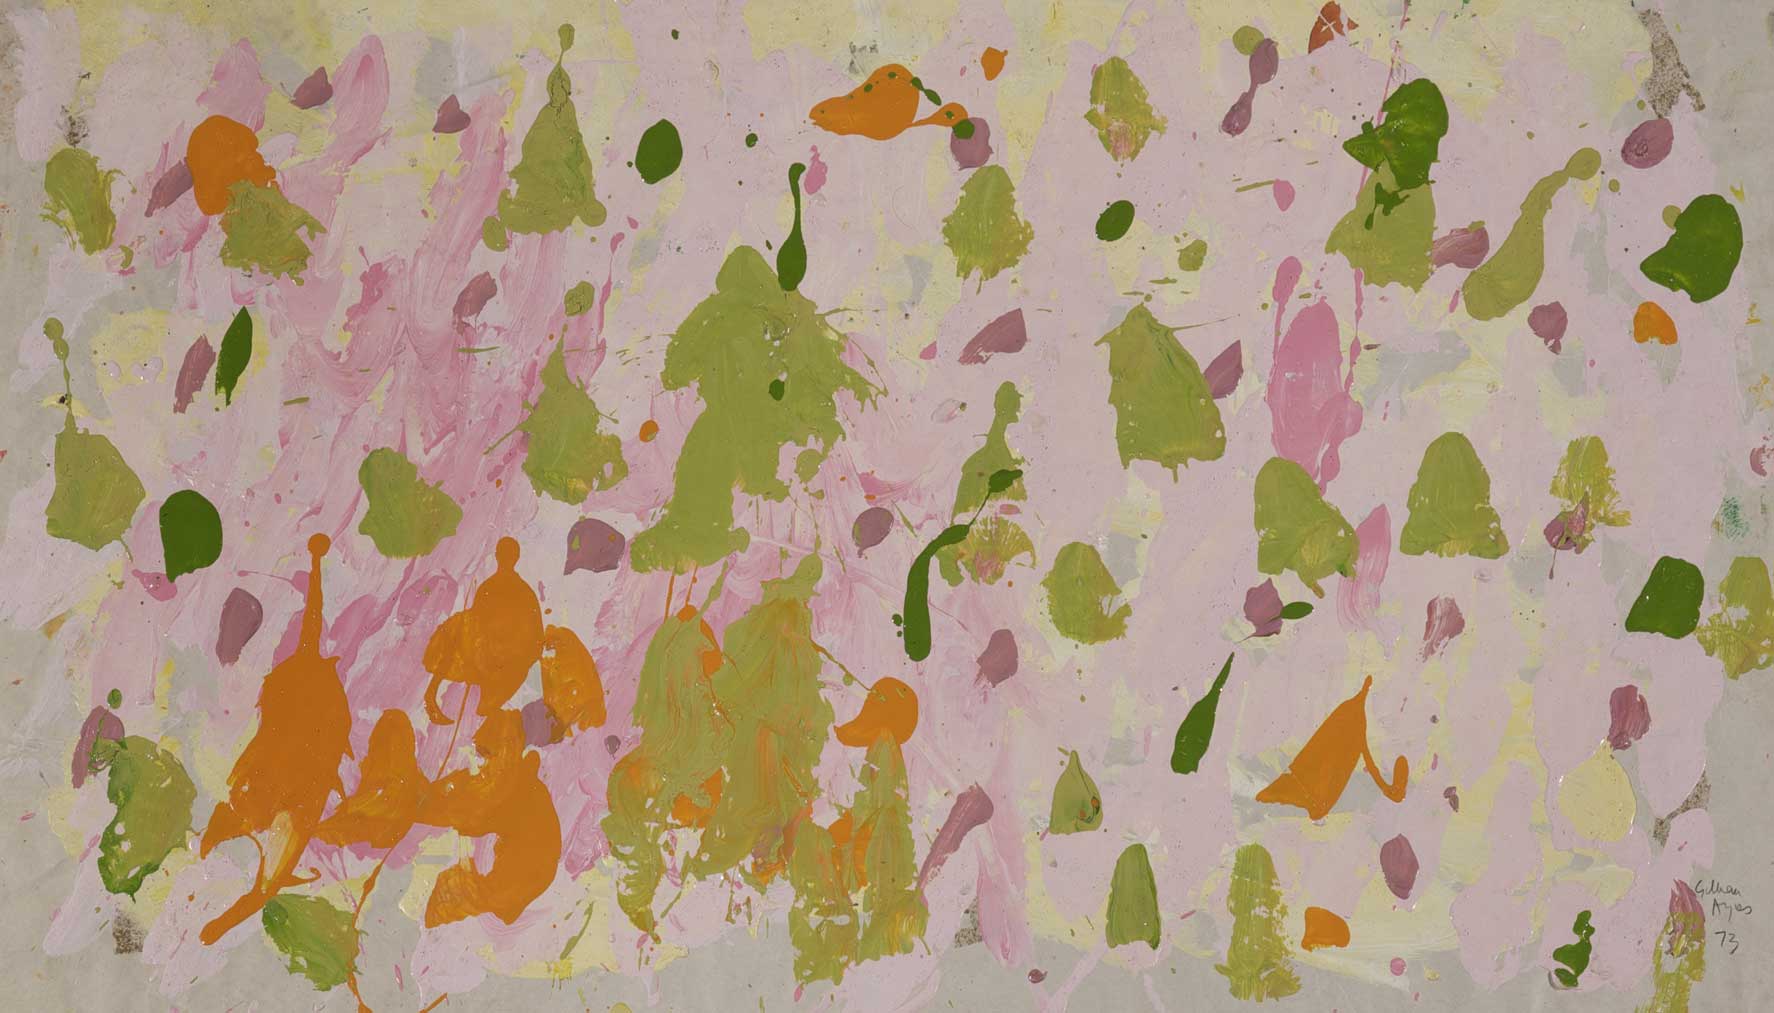 Painting by Gillian Ayres